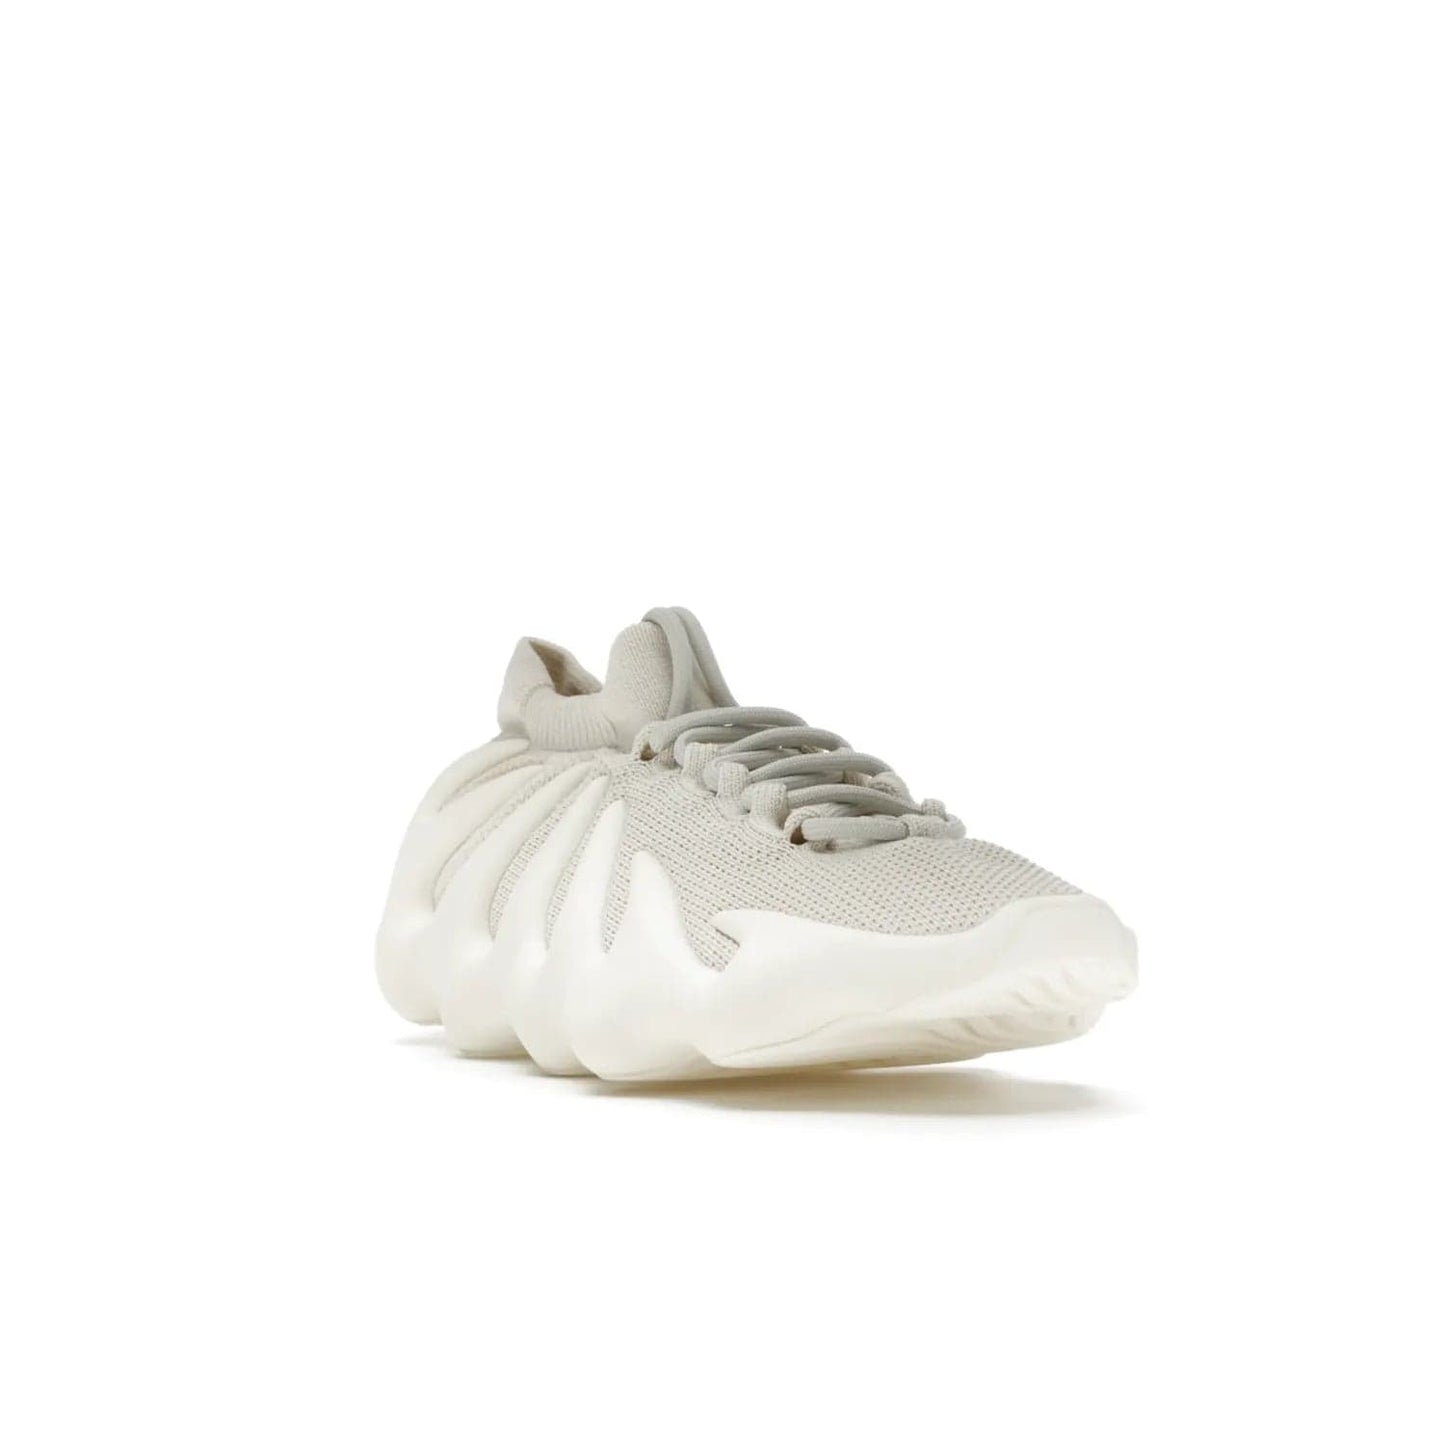 adidas Yeezy 450 Cloud White - Image 7 - Only at www.BallersClubKickz.com - Experience the future with the adidas Yeezy 450 Cloud White. A two-piece design featuring an extreme foam sole and mesh upper, this silhouette is expected to release in March 2021. Get your hands on this striking Cloud White/Cloud White colorway and stand out in the crowd.